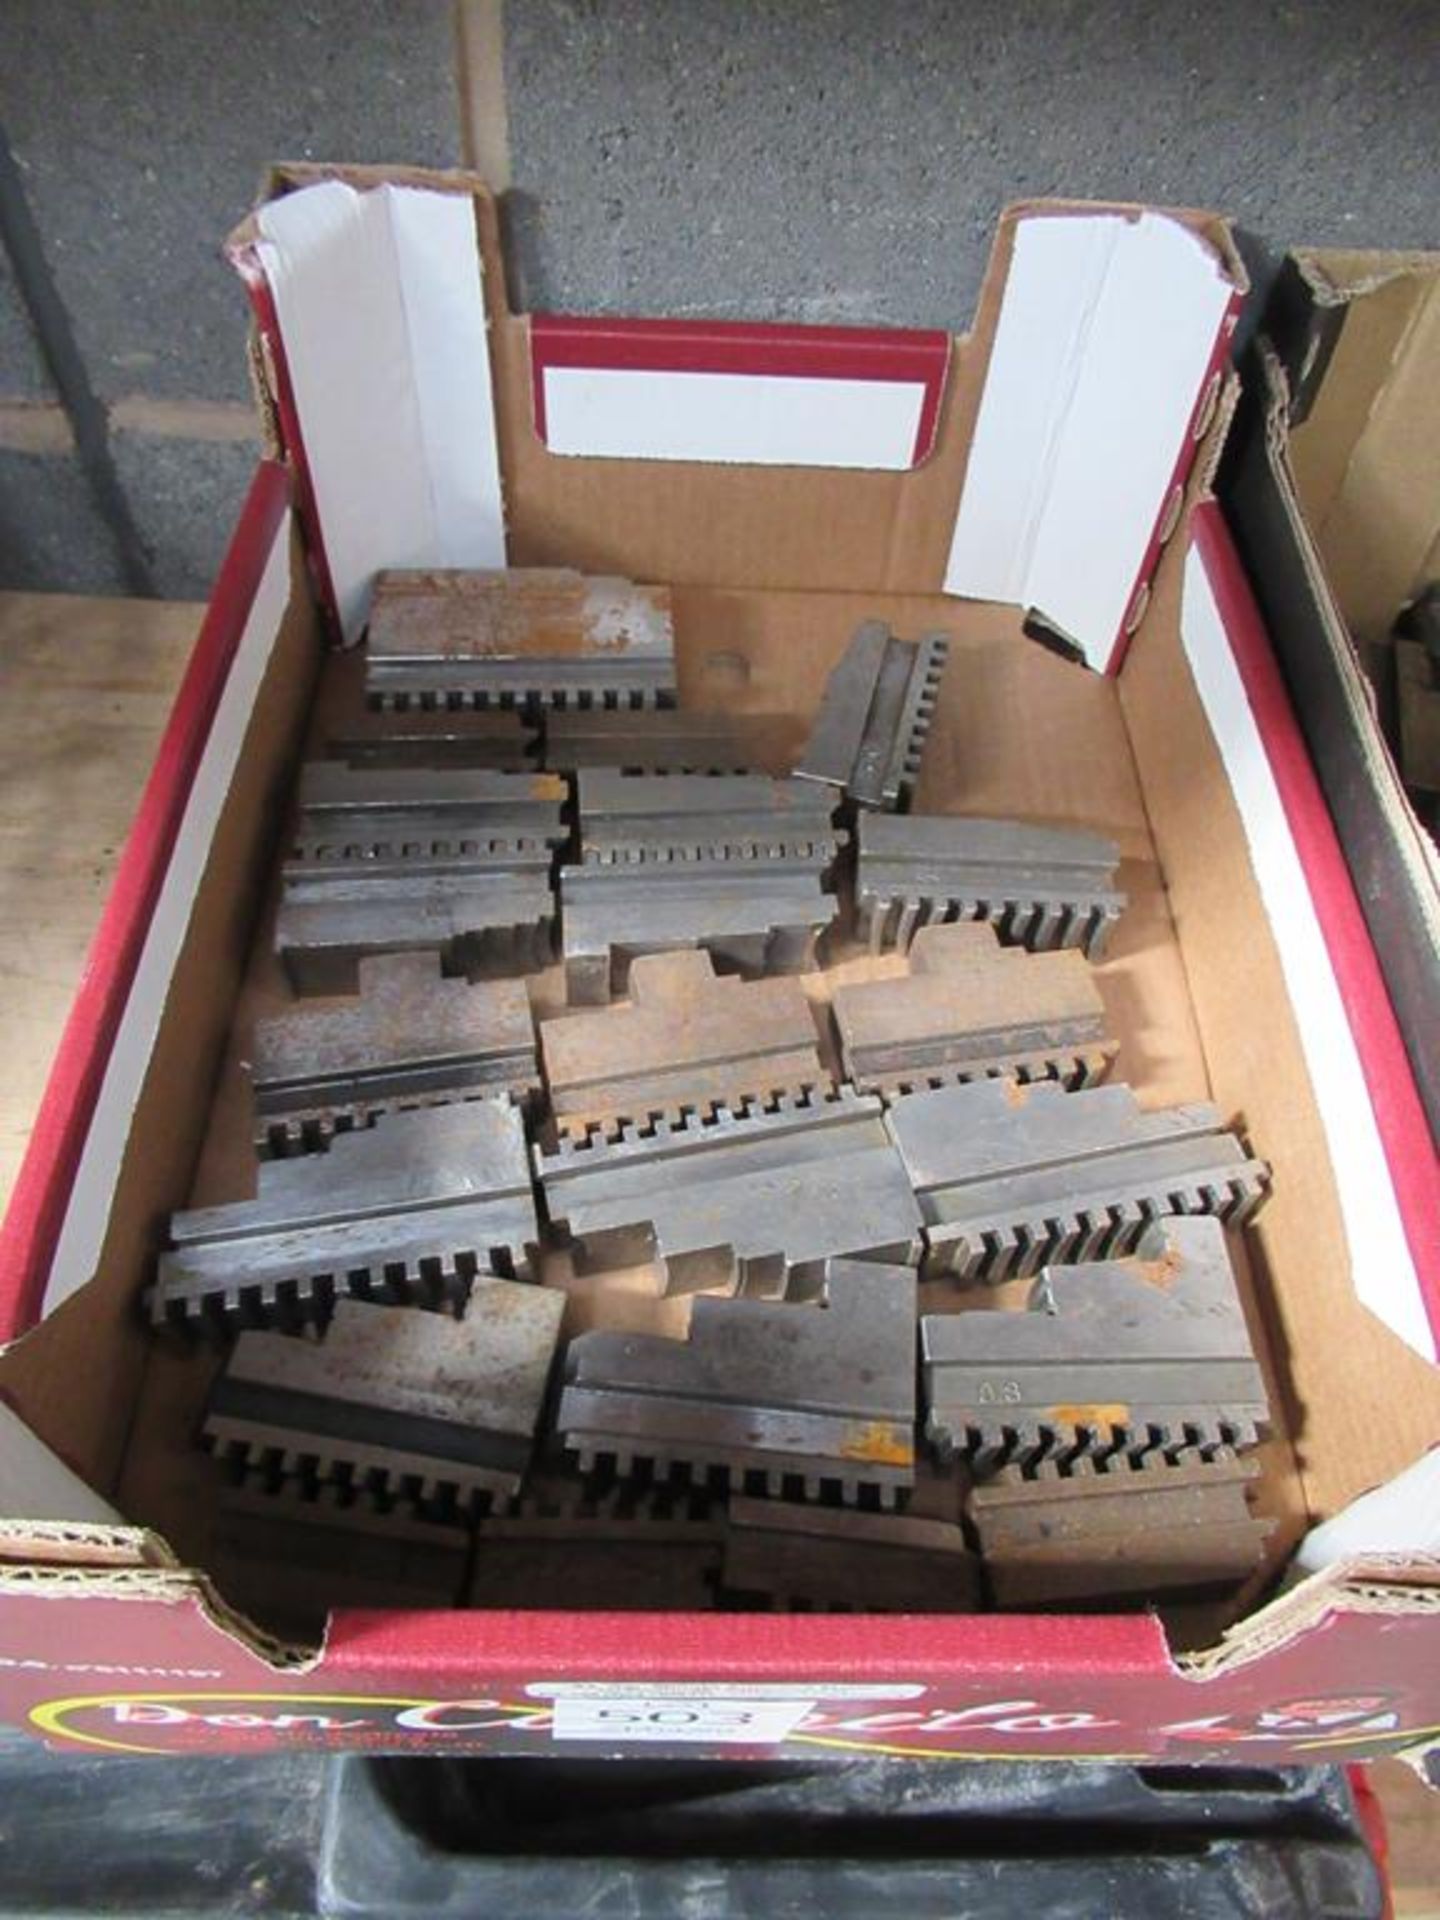 A box of various Machine Clamps